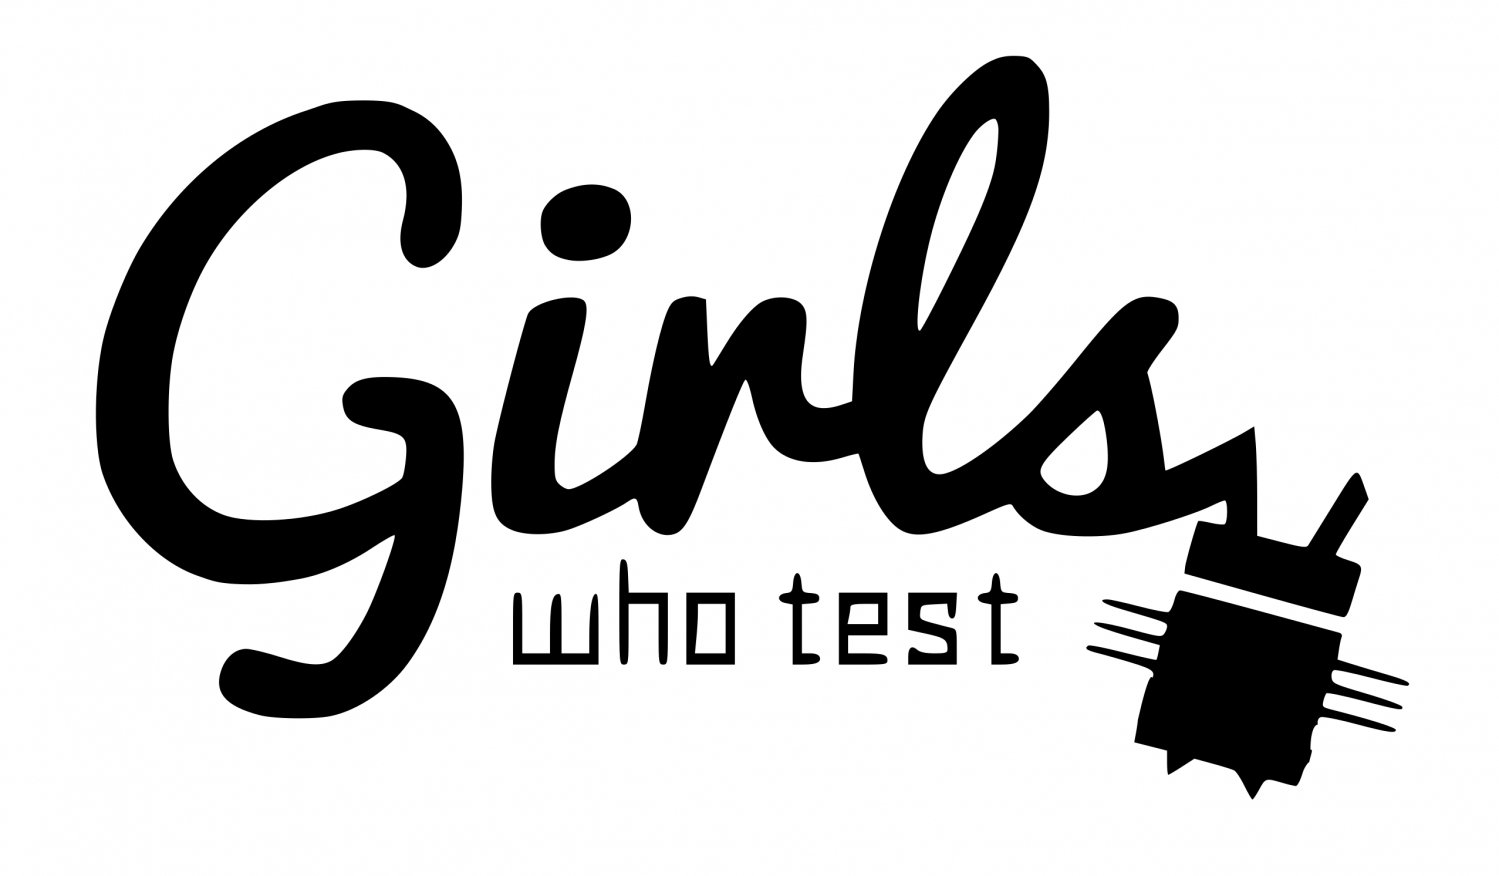 Girls Who Test..software!